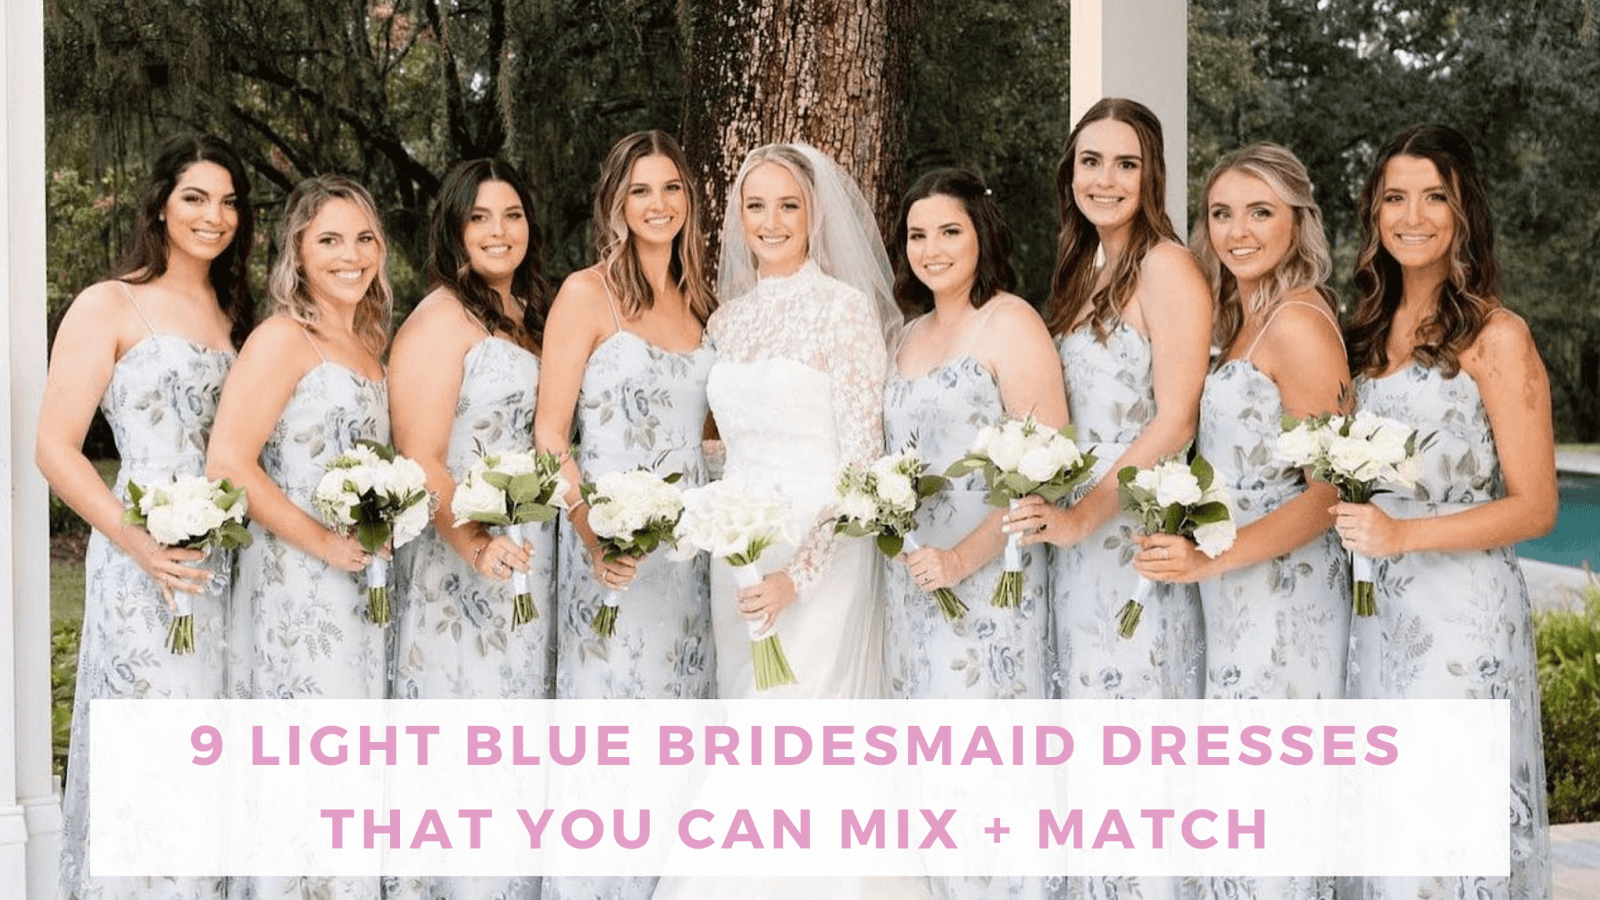 How to shop for mix-and-match bridesmaid dresses - Good Morning America